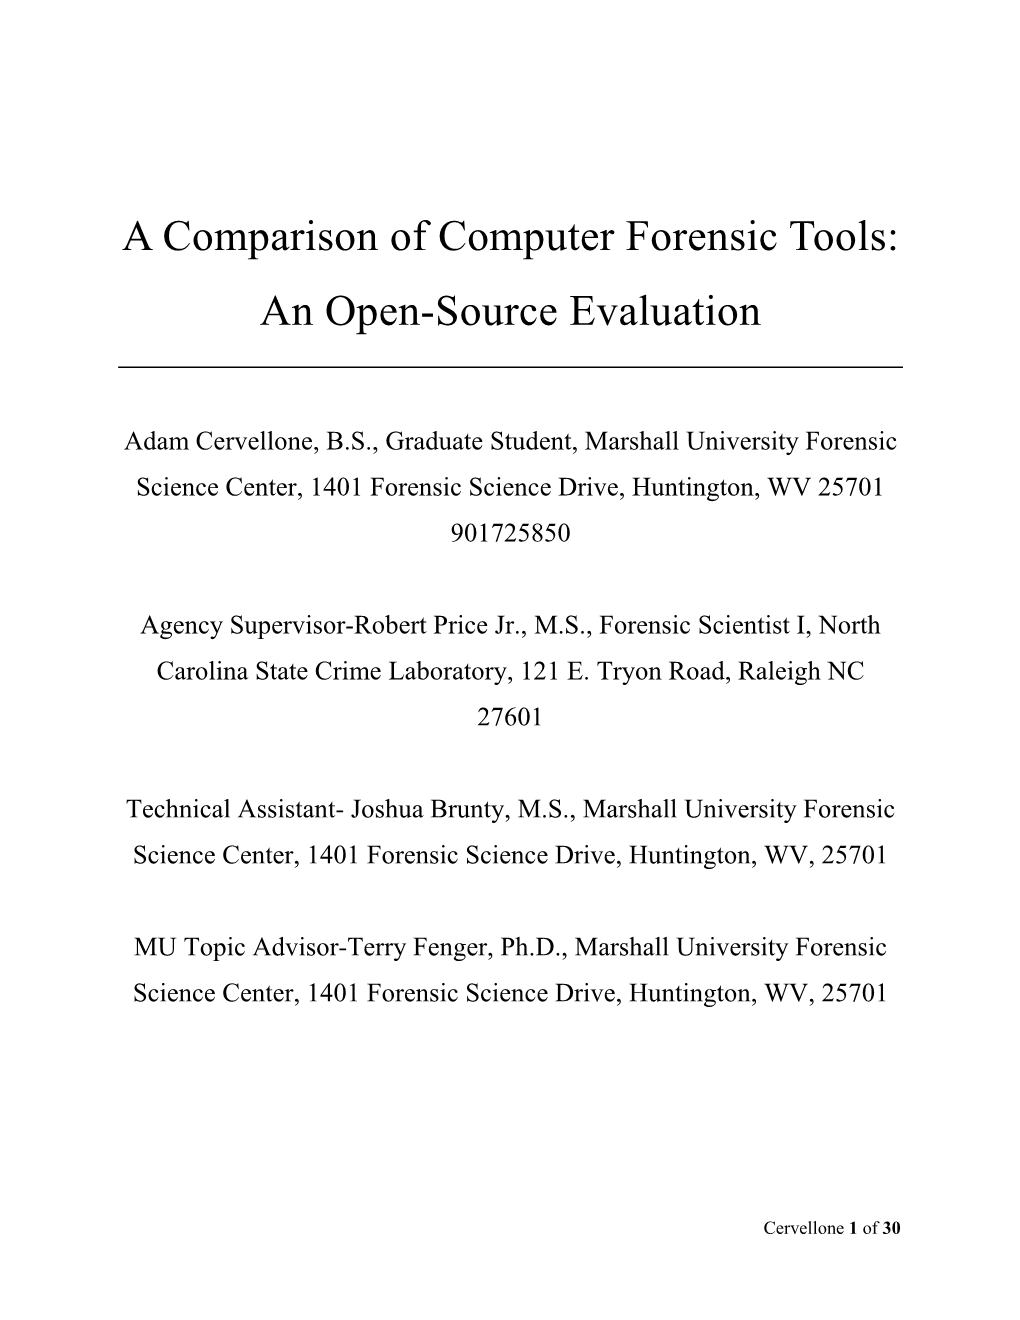 A Comparison of Computer Forensic Tools: an Open-Source Evaluation